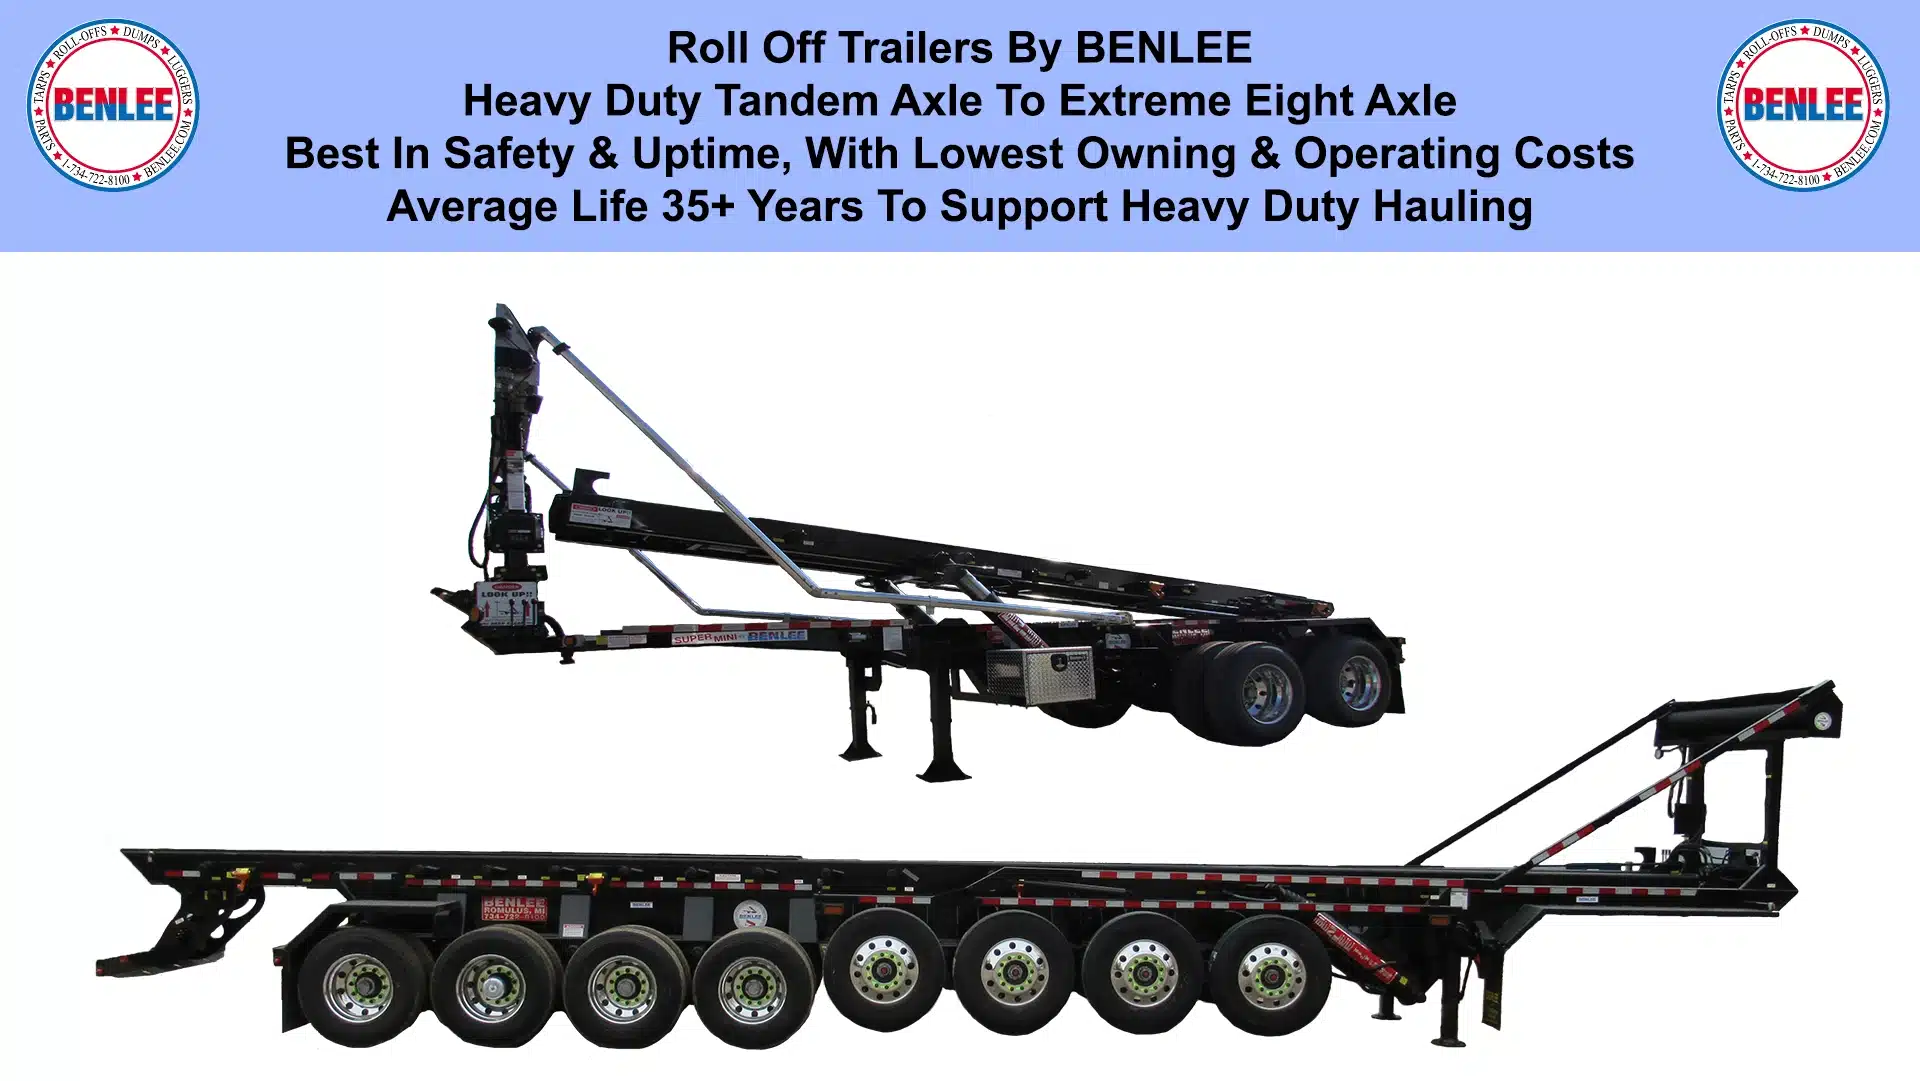 Roll Off Trailers by BENLEE